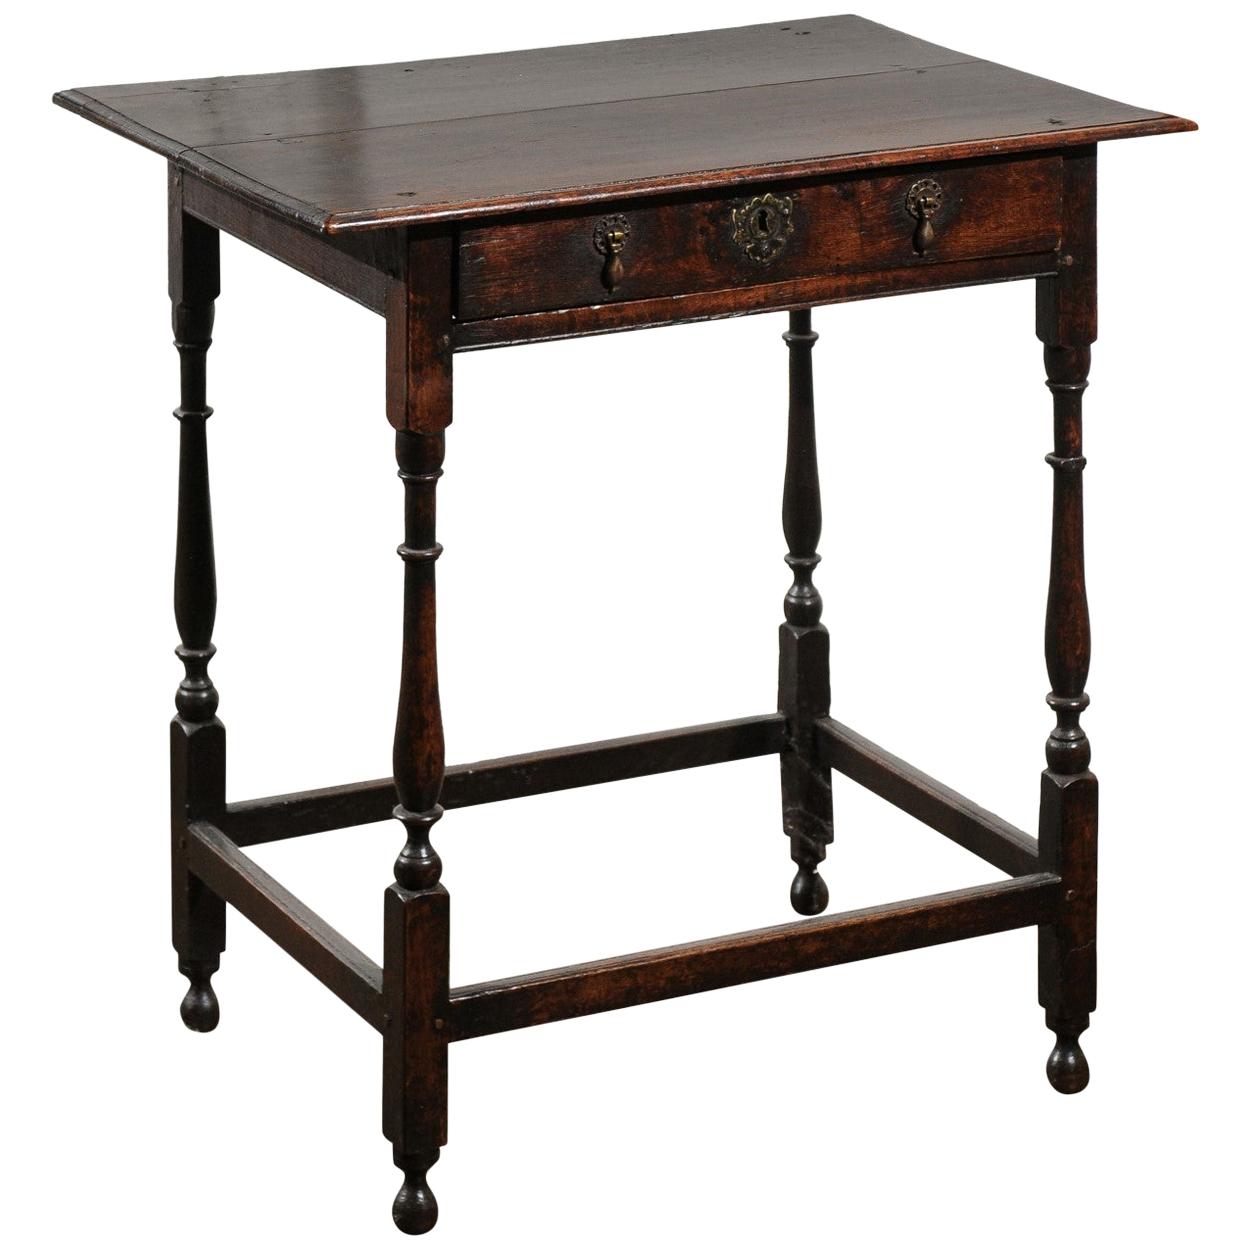 English William and Mary 1700s Oak Side Table with Drawer and Turned Legs